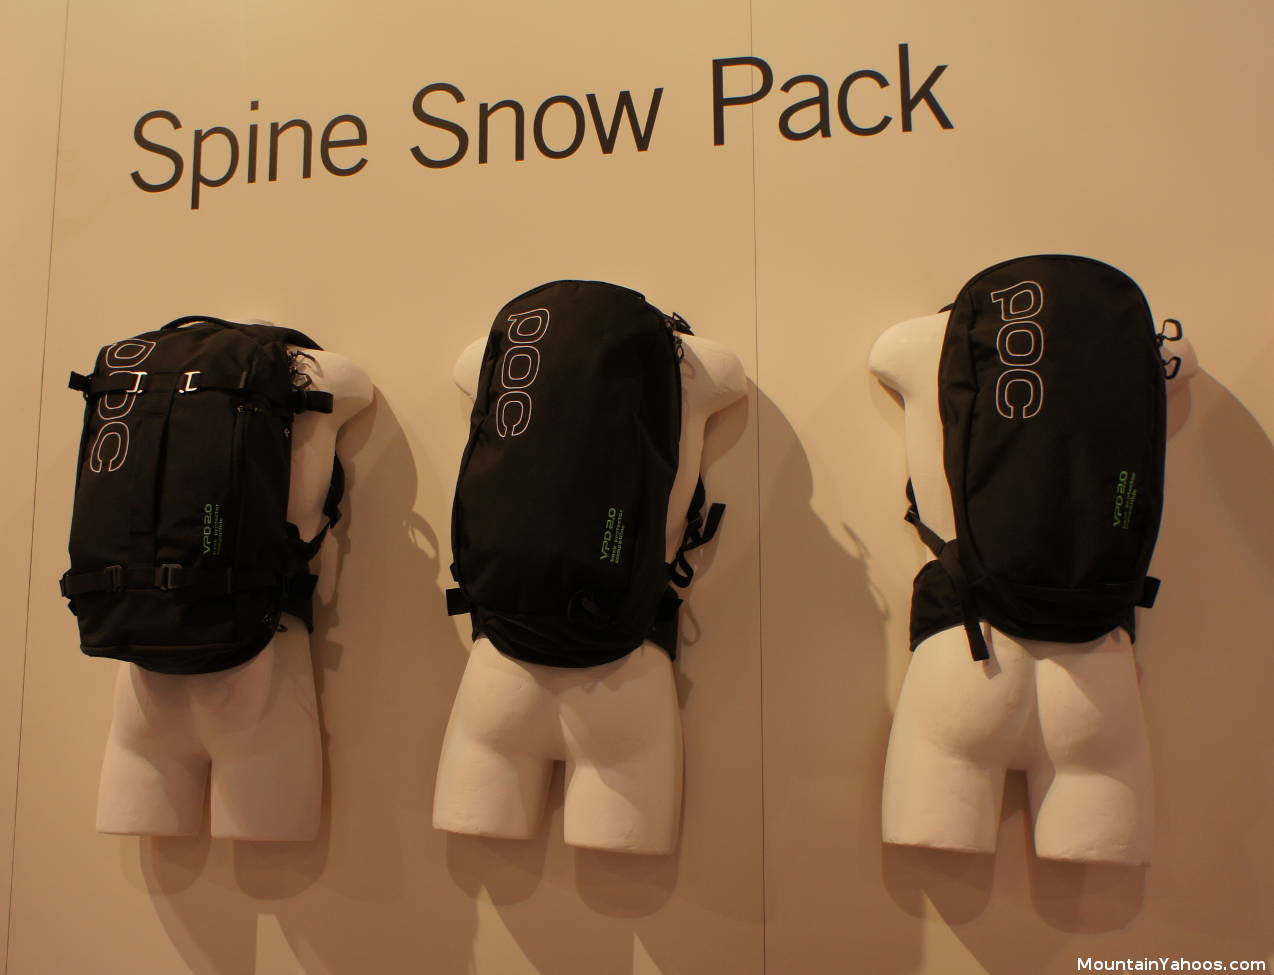 POC Spine Snow Pack Body protection